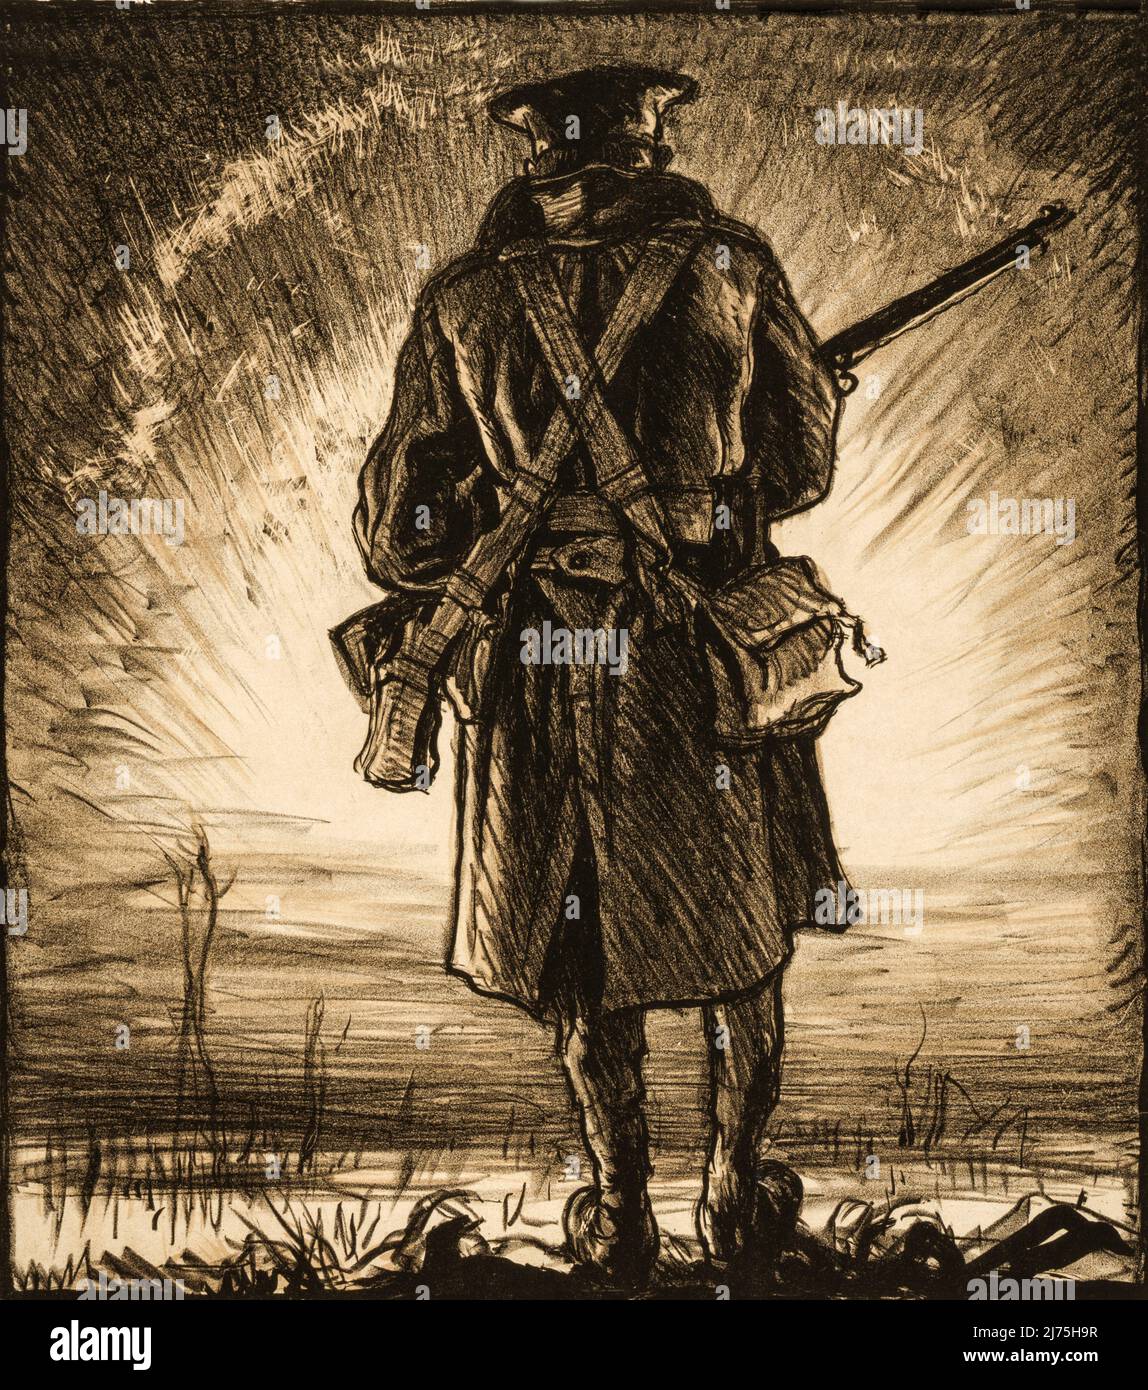 A detail from a British poster, 1915, appealling for contributions to the National fund for the Welsh troops. The illustration shows a soldier facing a bright light on the horizon, possibly an explosion or dawn. The artist was Frank Brangwyn (1867-1956). Stock Photo